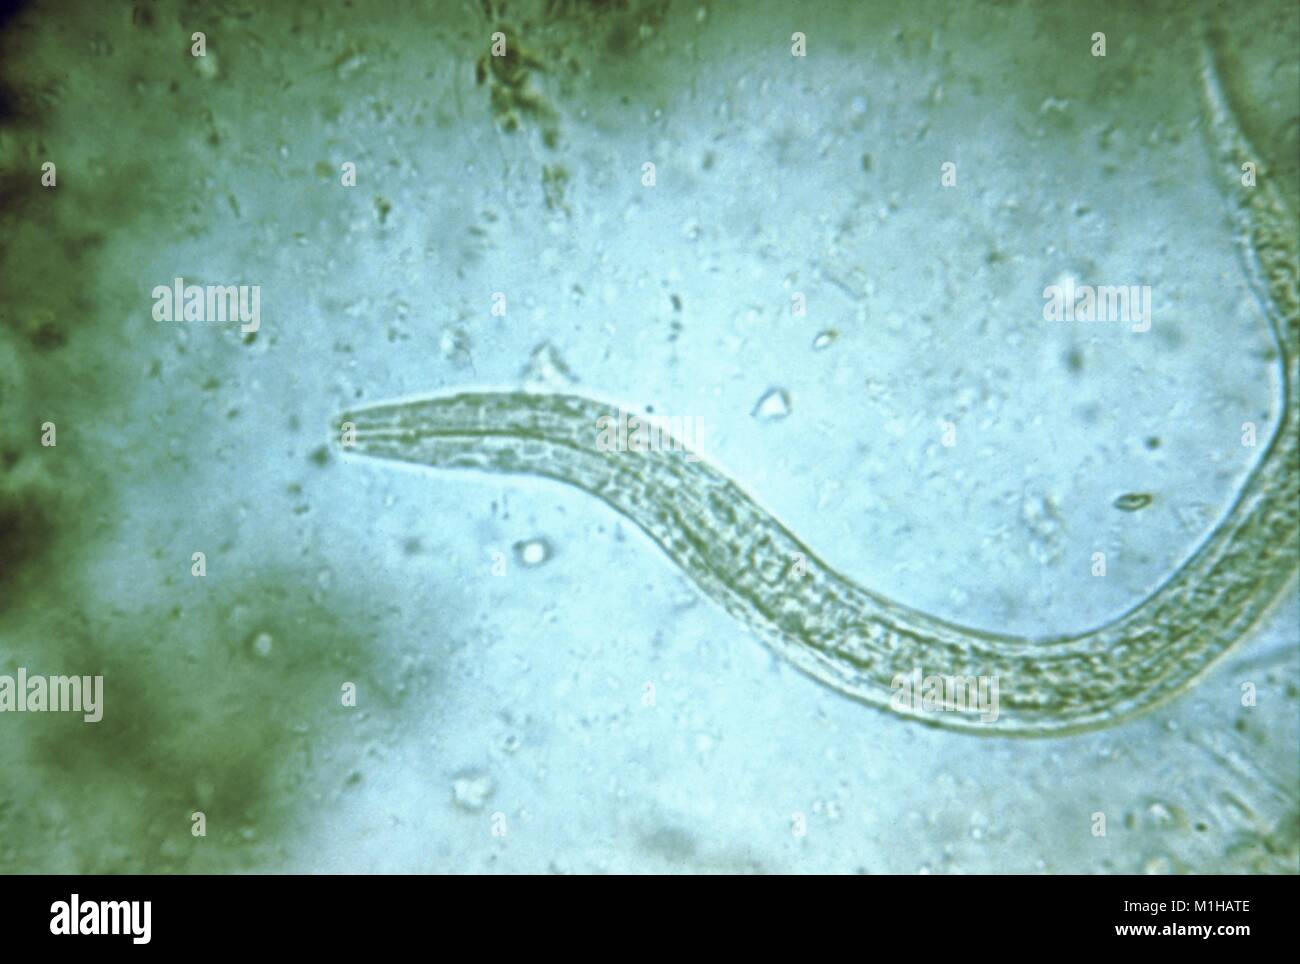 Photomicrograph of human hookworm (Ancylostoma duodenale and Necator americanus) rhabditiform larva which is its early noninfectious stage, 1979. Image courtesy CDC. () Stock Photo